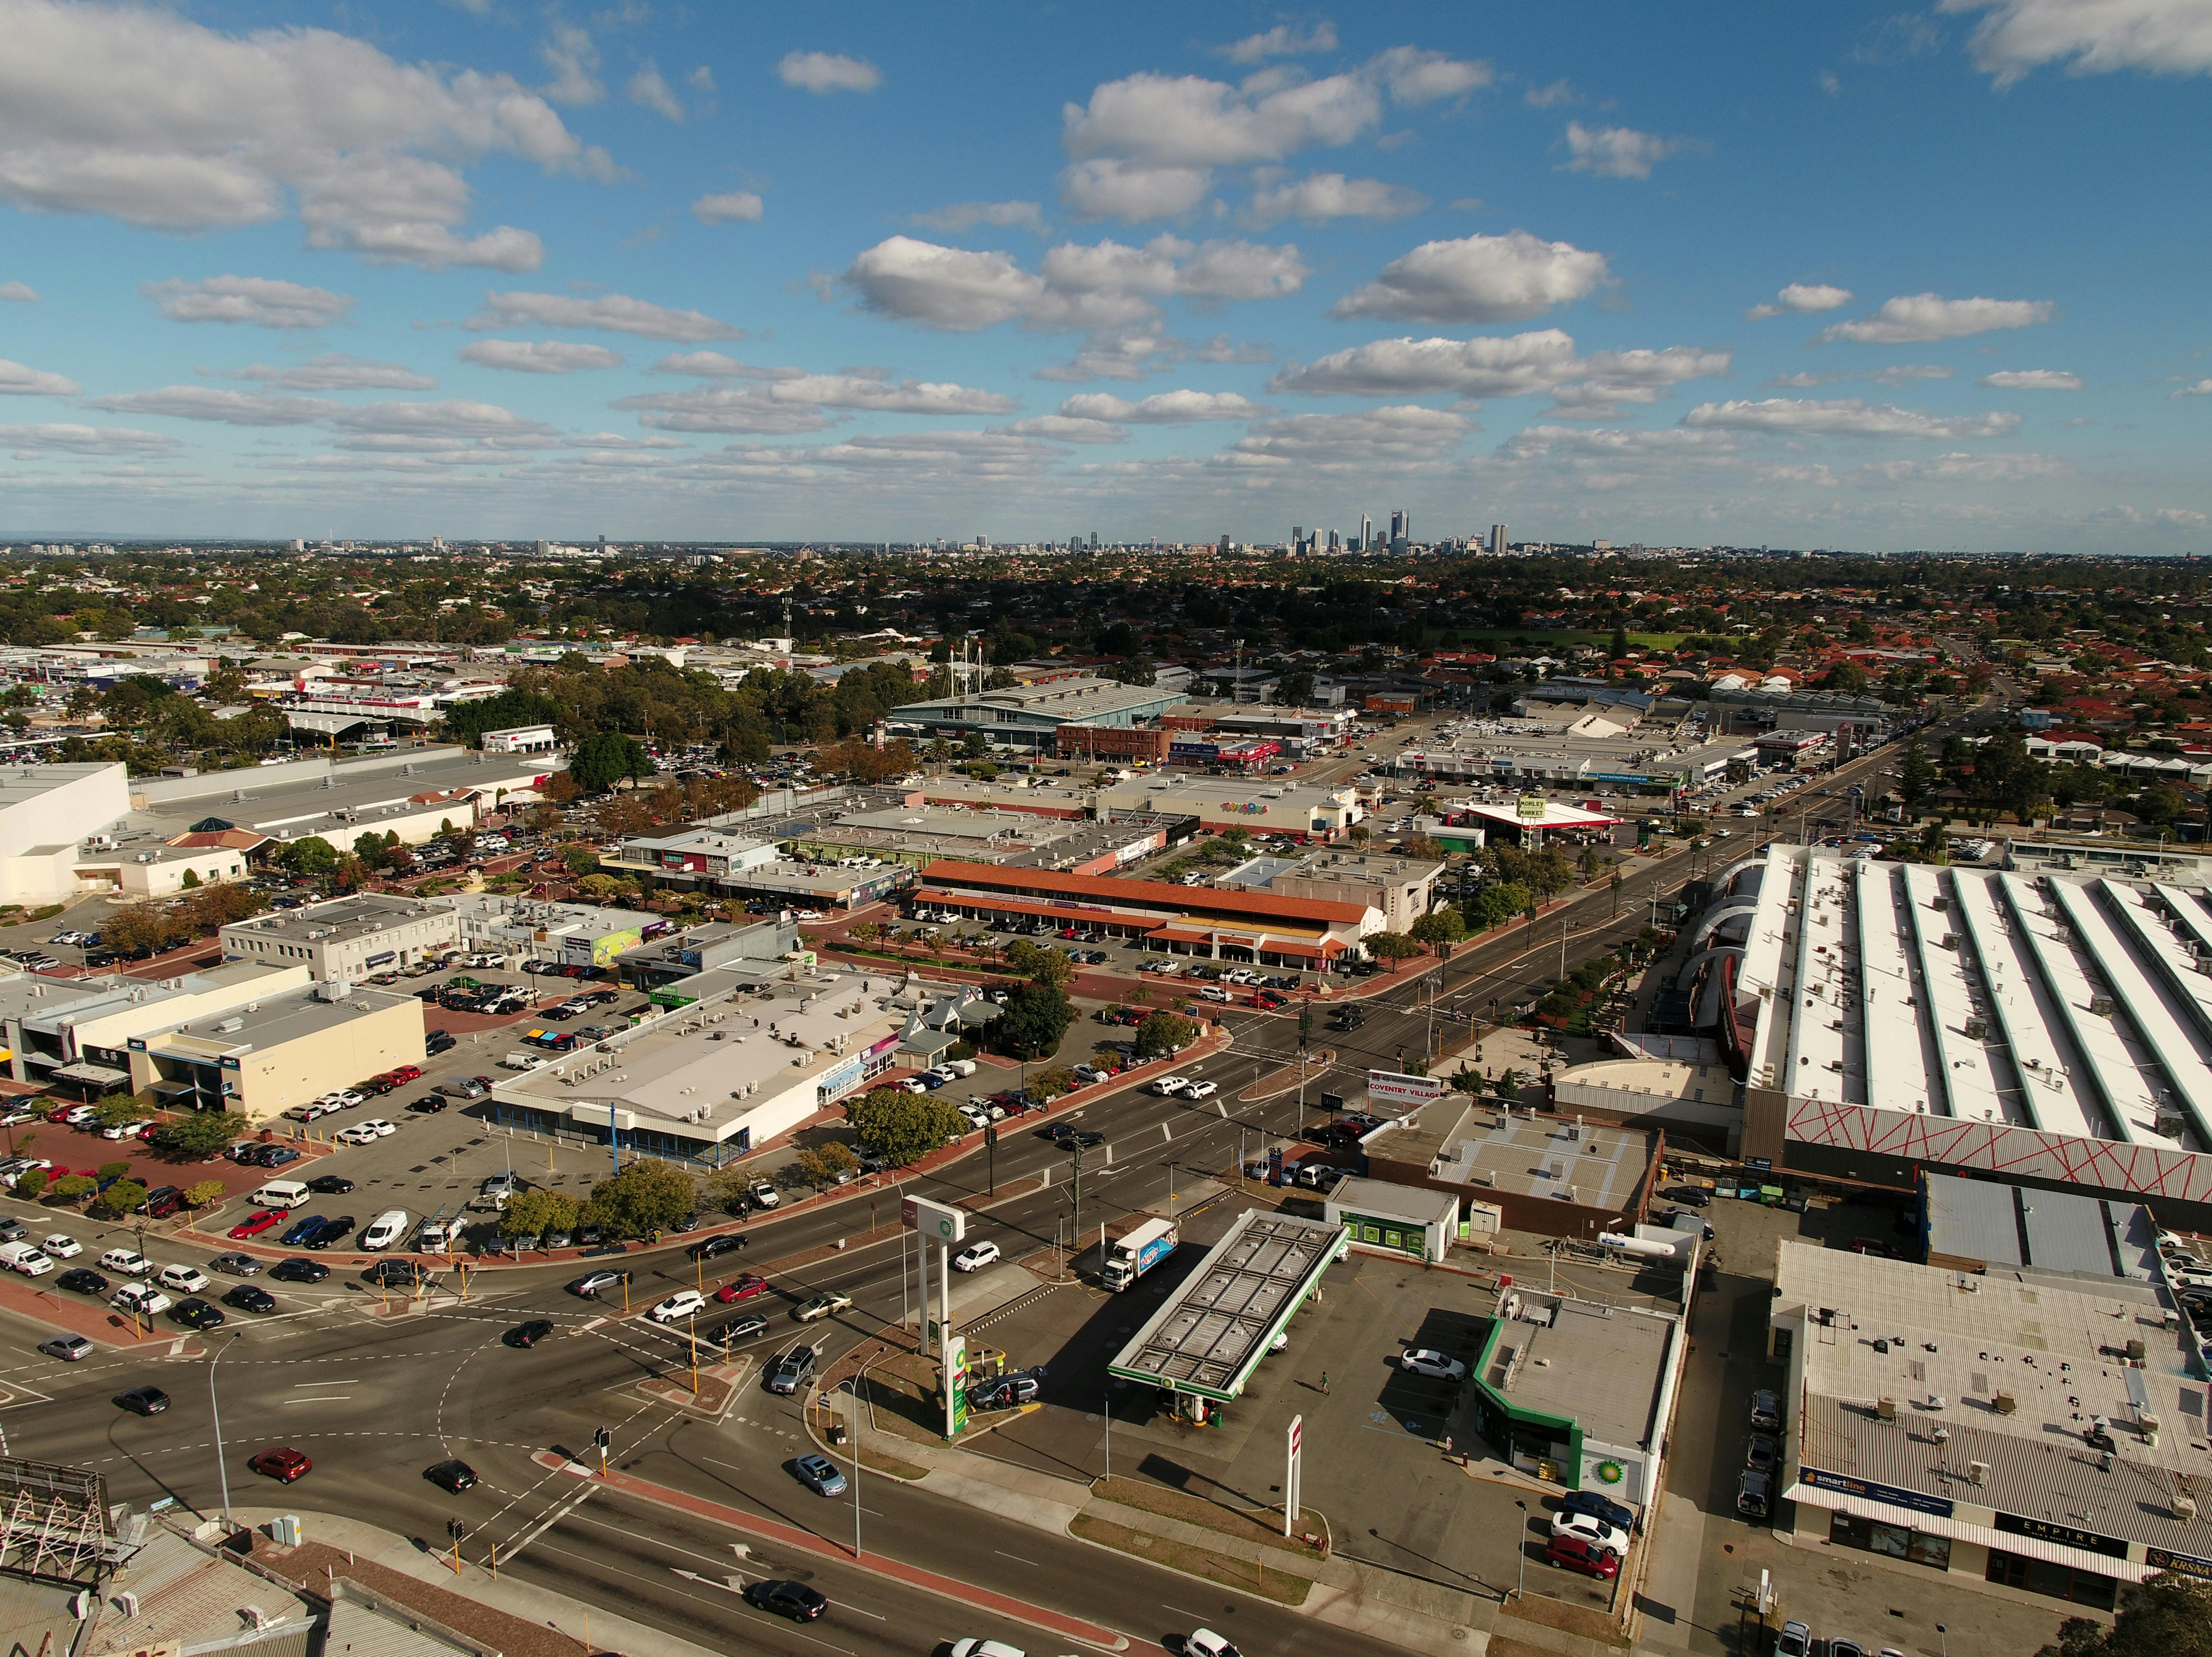 Cnr Russell And Walter Road West   Aerial Image